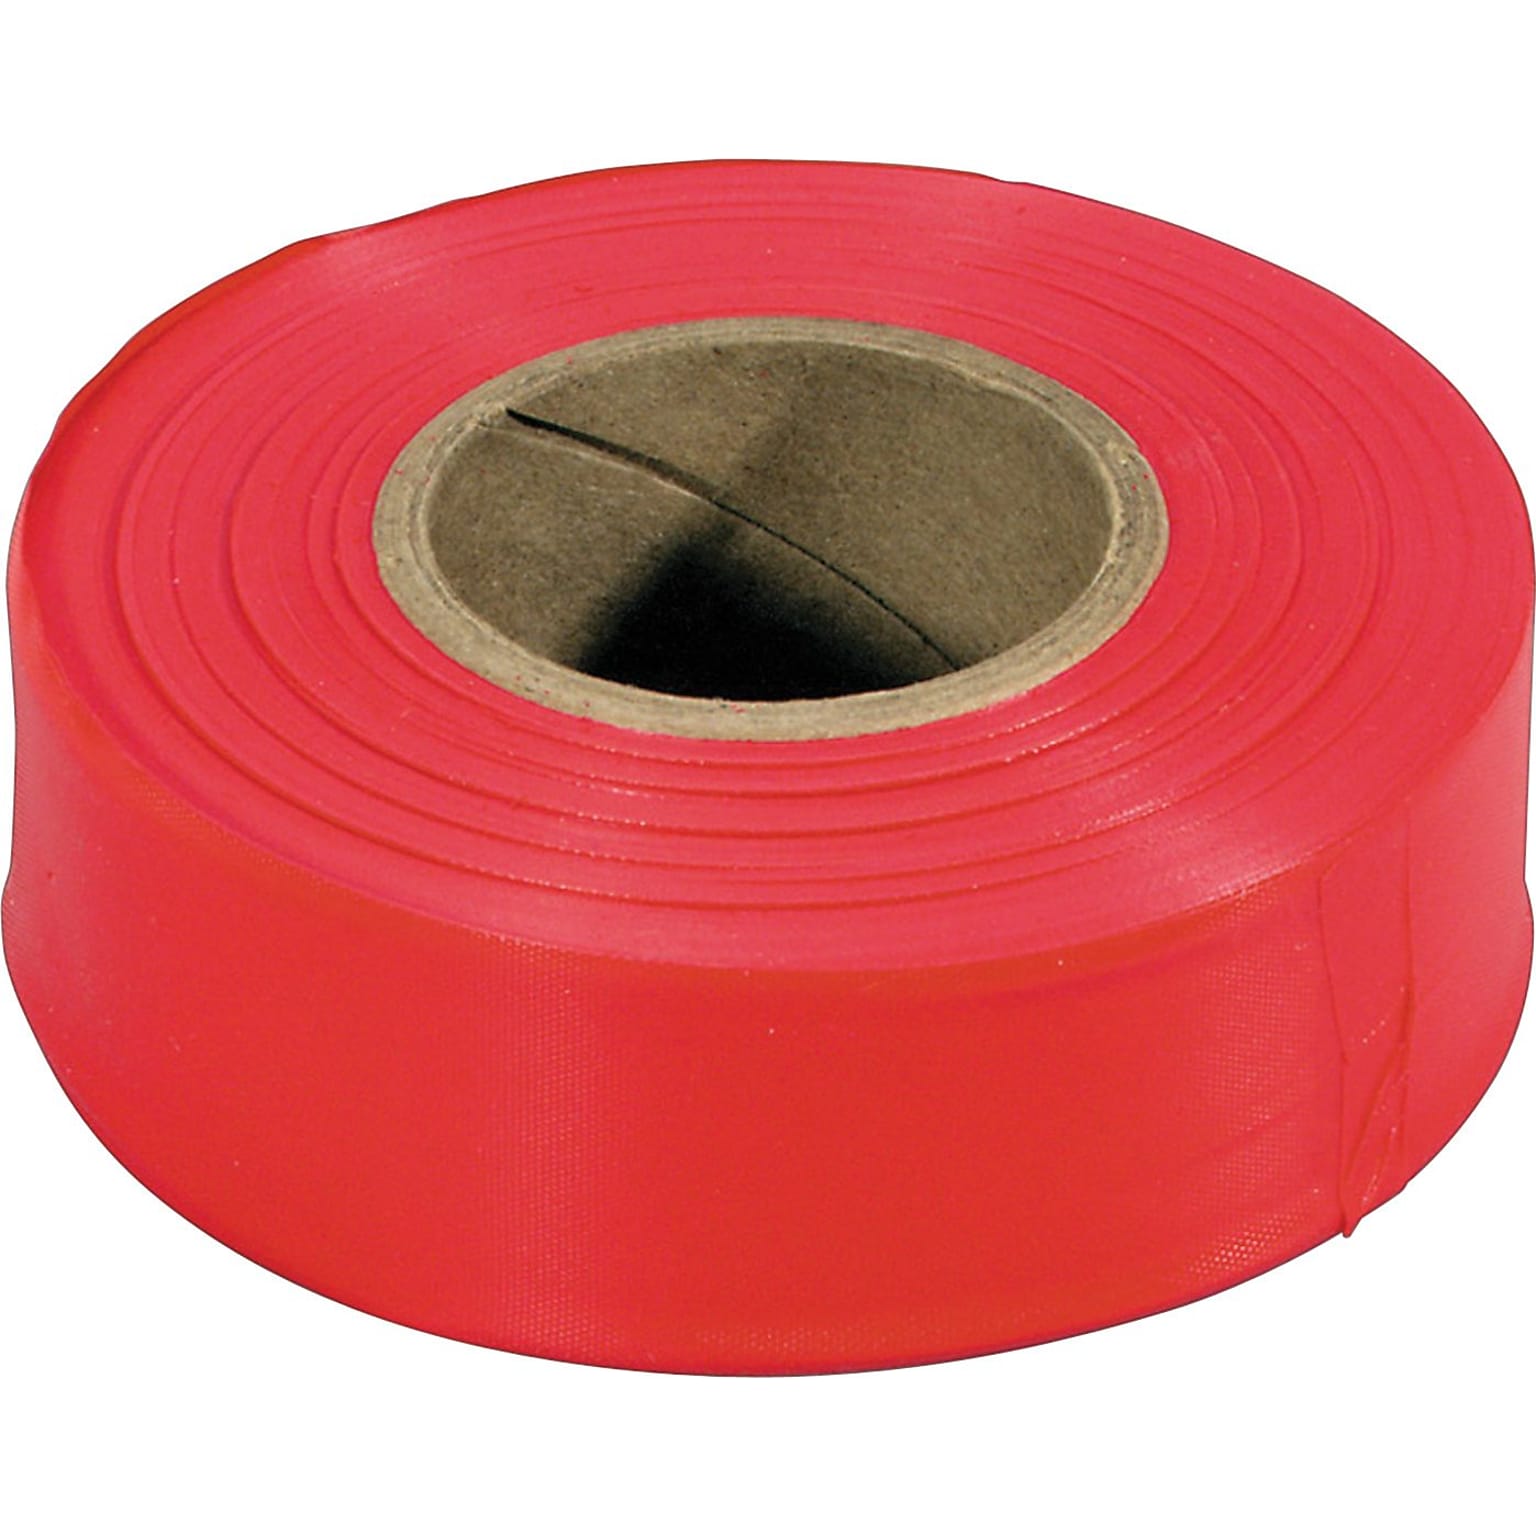 Irwin Strait-Line Flagging Tapes, Red, 300 Length (586-65901)